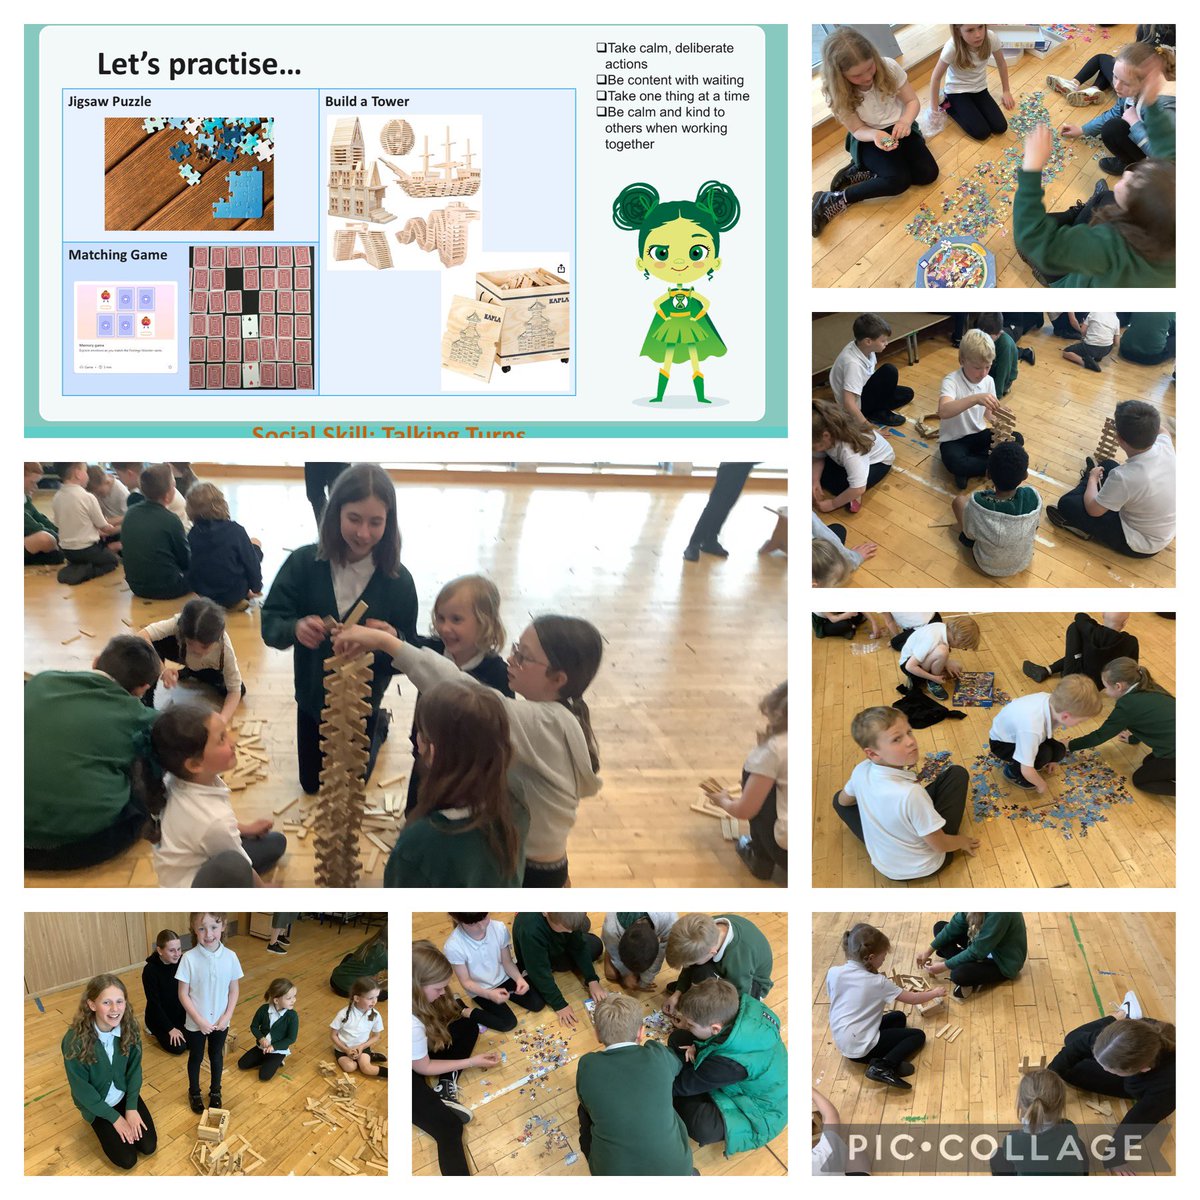 Today we have been working on being patient with the help of our Learning Power Hero, Patient Paton. We completed activities where we had to take our time; take calm considered steps; and wait on a partner to take a turn. #stmagslearningpowers #successfullearners